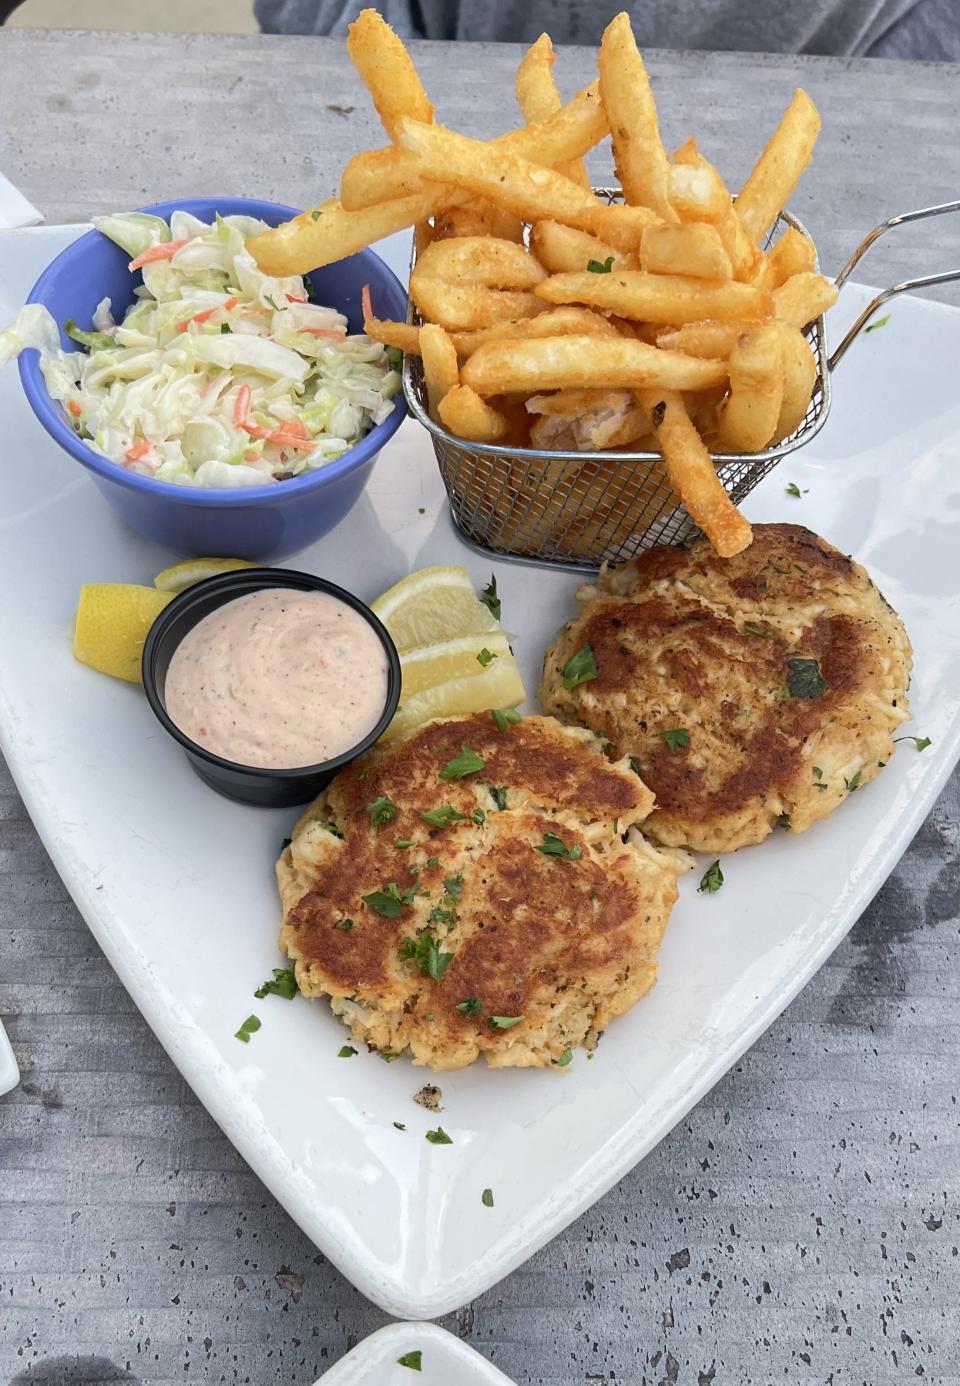 At Island Beach Bar & Restaurant in Ocean Village in Fort Pierce, the crab cakes are lump Maryland-style crab combined with breadcrumbs, spices and mayo. The sauteed exterior yielded tender and flavorful cakes with a tangy remoulade sauce on the side.